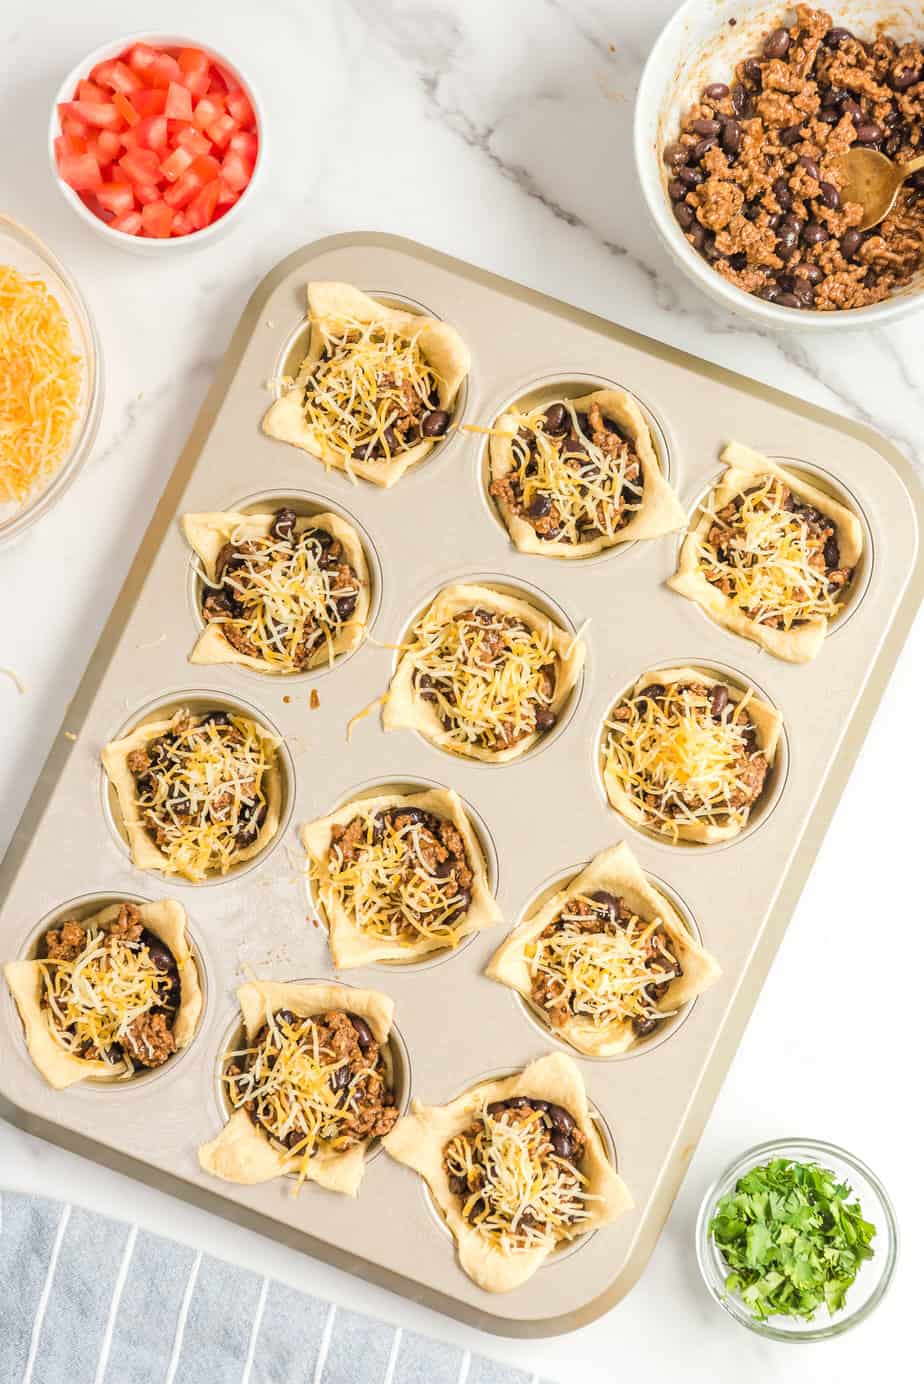 Beef, beans and cheese added to dough in muffin tins from above.